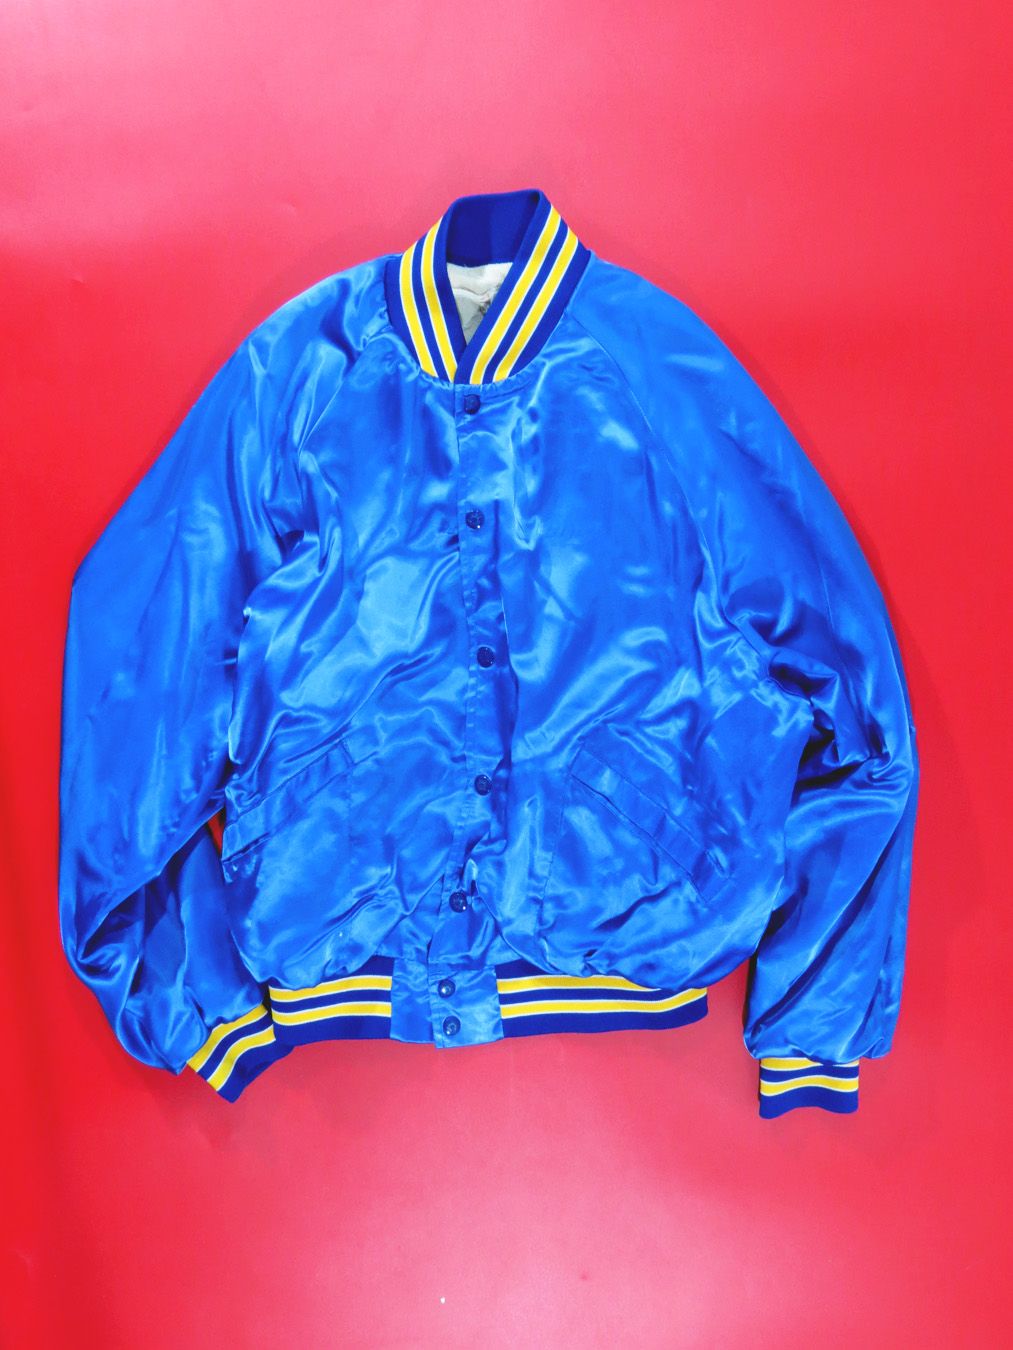 80s Blue Yellow Lined Satin Jacket - 5 Star Vintage